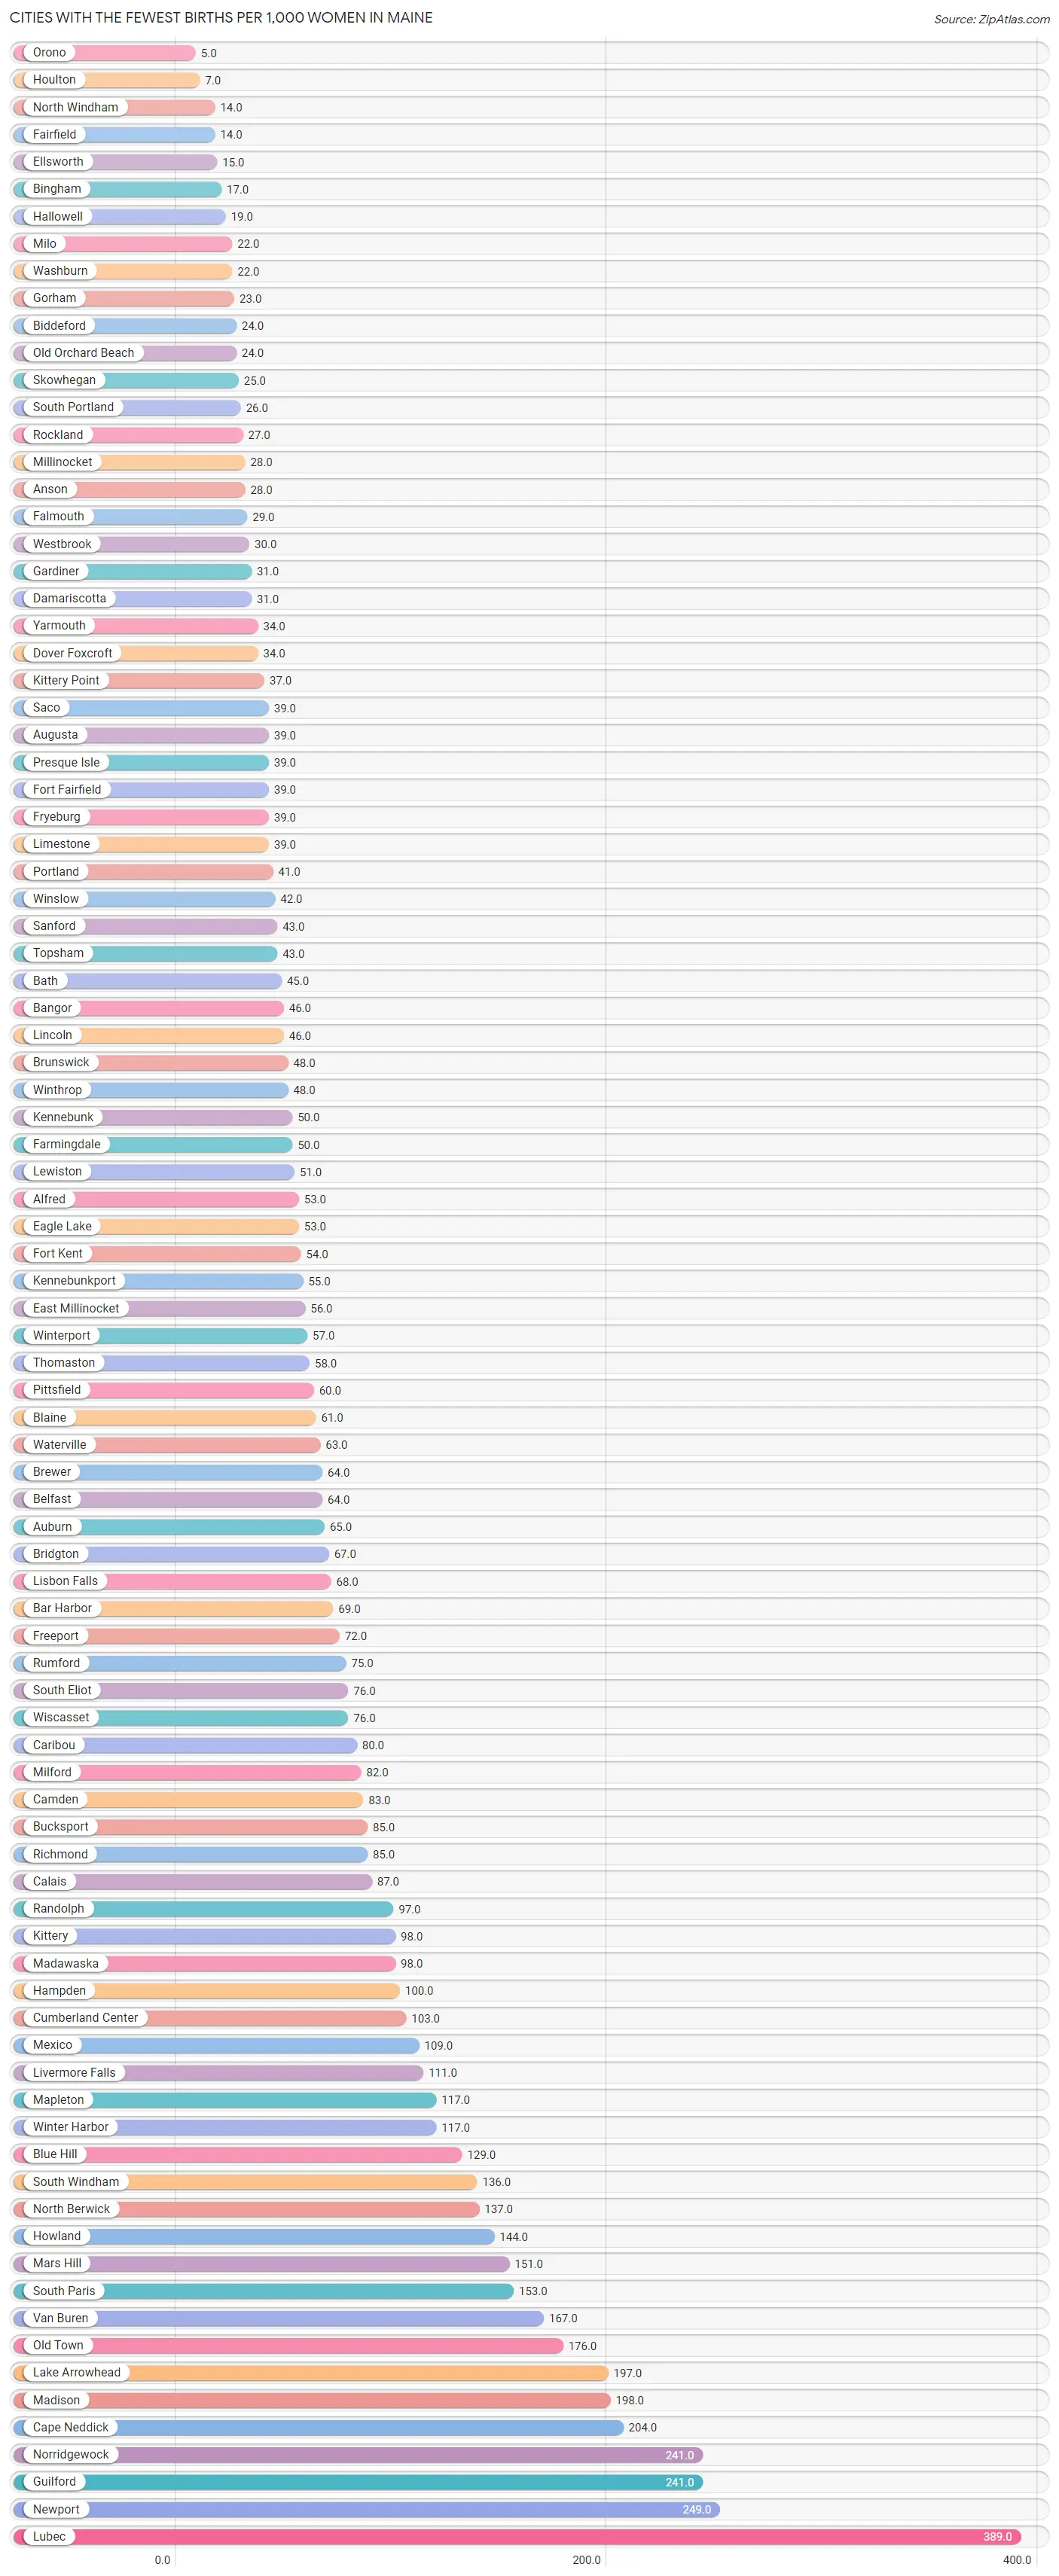 Cities with the Fewest Births per 1,000 Women in Maine Chart